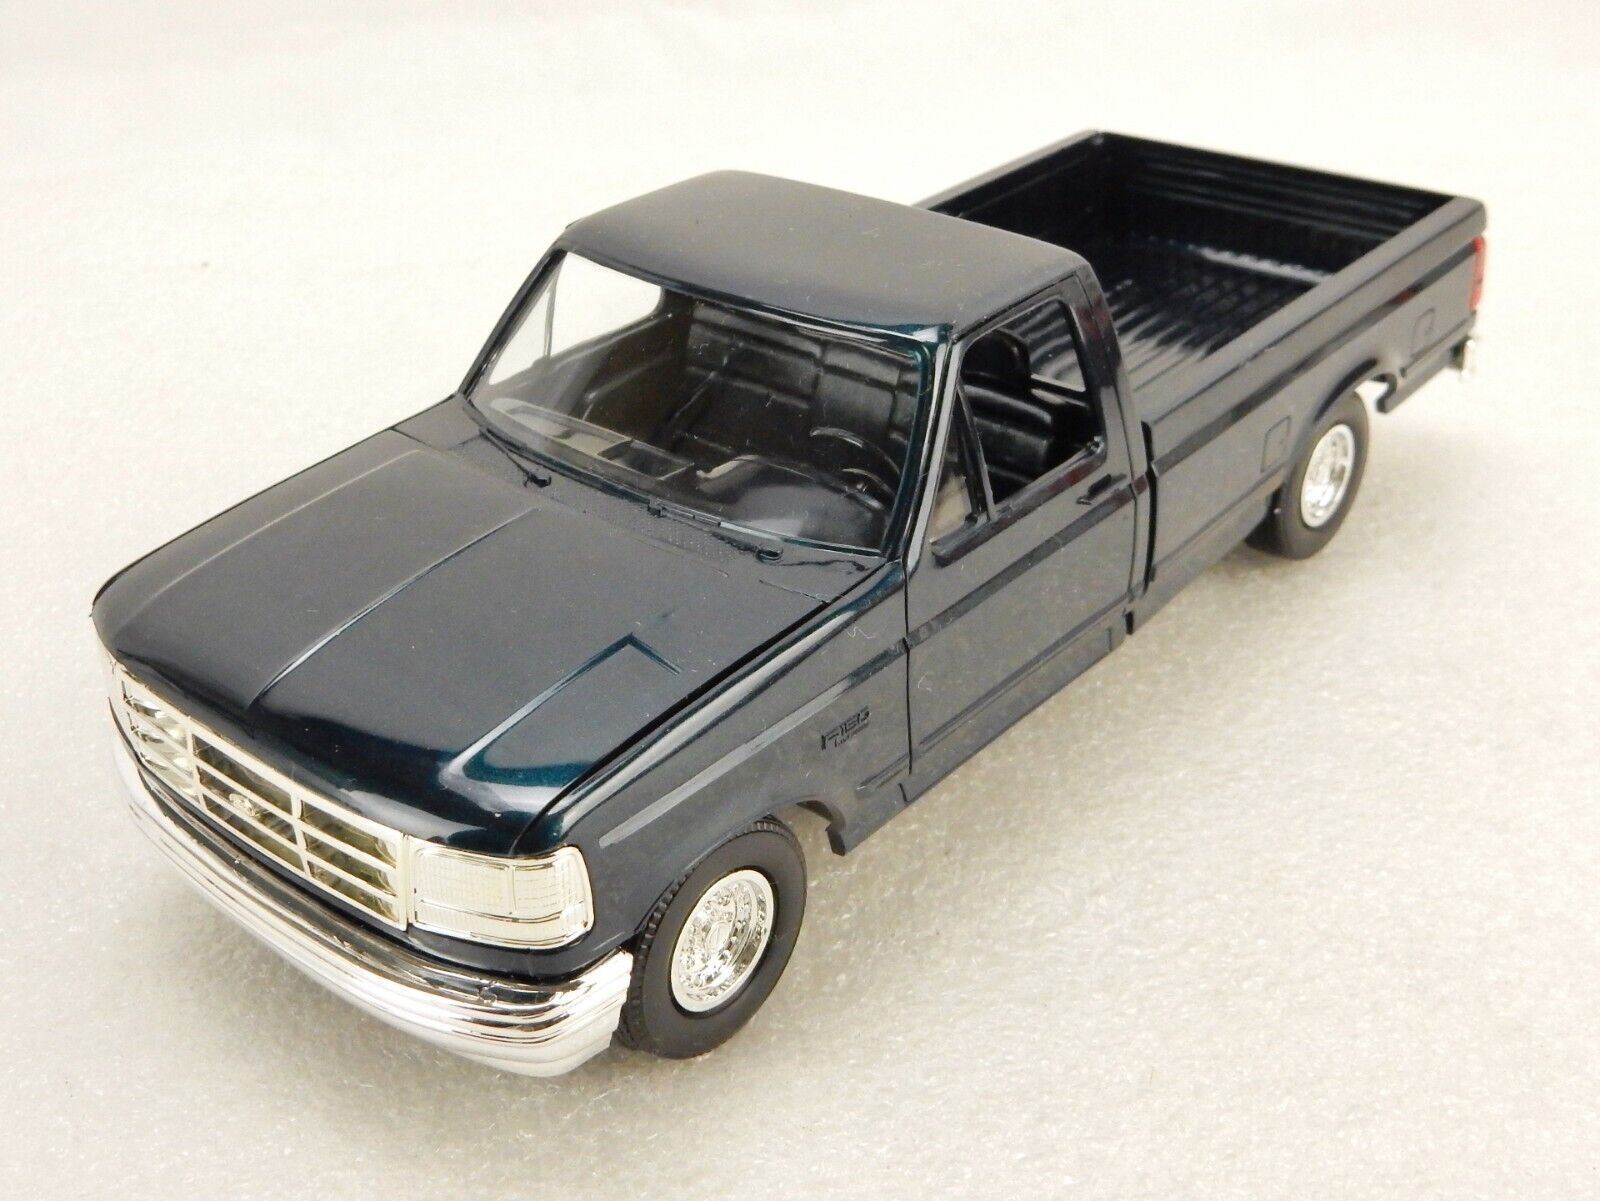 1994 Ford F-150 XLT Pickup, 1:25 ERTL/AMT #6293, Dark Forest Green, Collectible